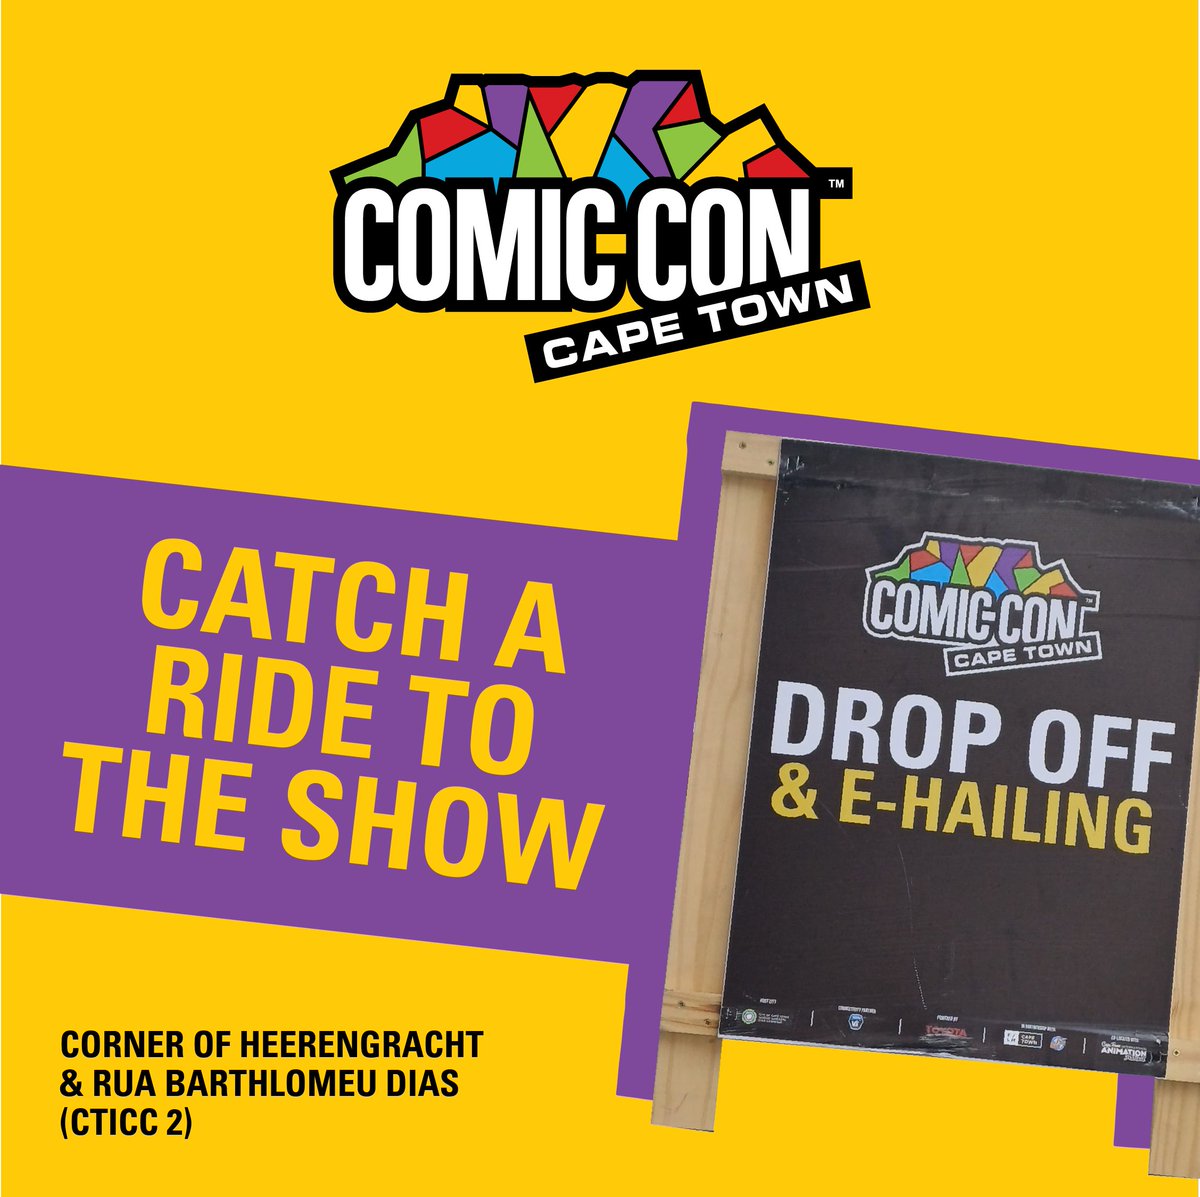 Coming to ComicConCapeTown? Skip the parking hassle and cruise straight into the #ComicConCapeTown fun! ‍🚗 We recommend using e-hailing services for a smooth ride. Relax and focus on all the epic adventures at the Con. Remember to prioritize safety when using these services.